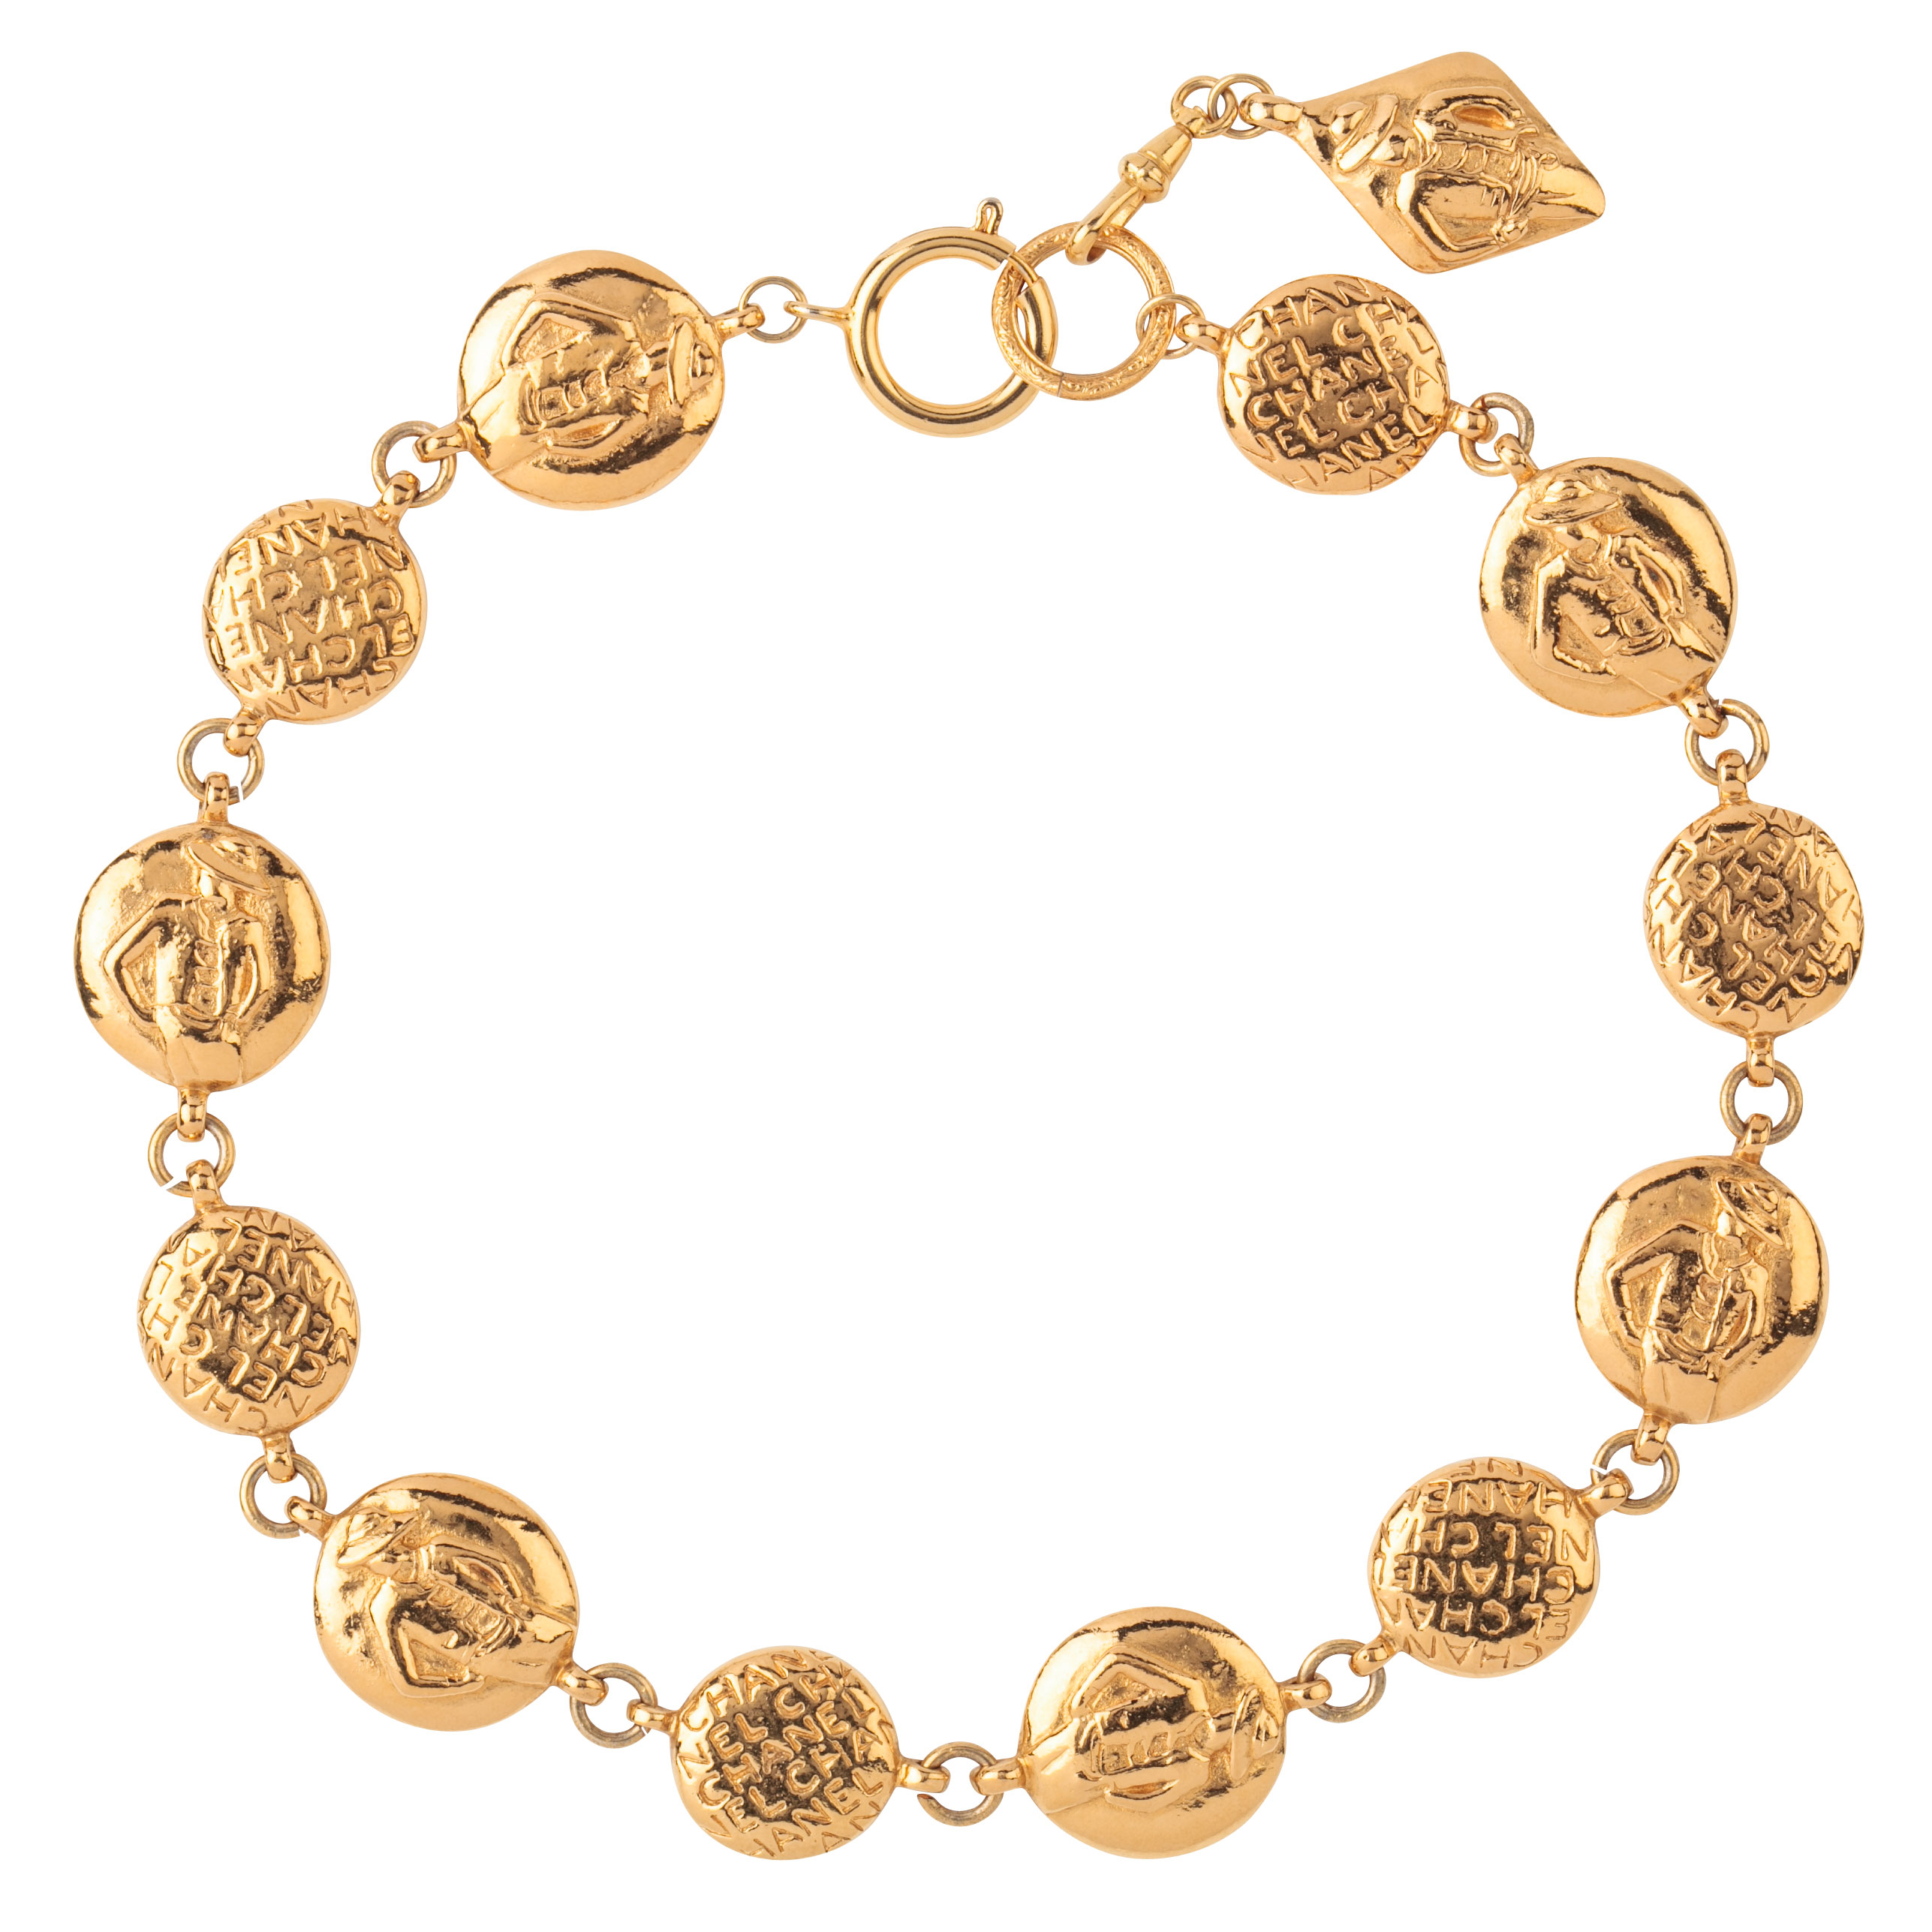 This 1980s Chanel gold coin necklace is available at Fortnum & Mason. Photo courtesy Susan Caplan.